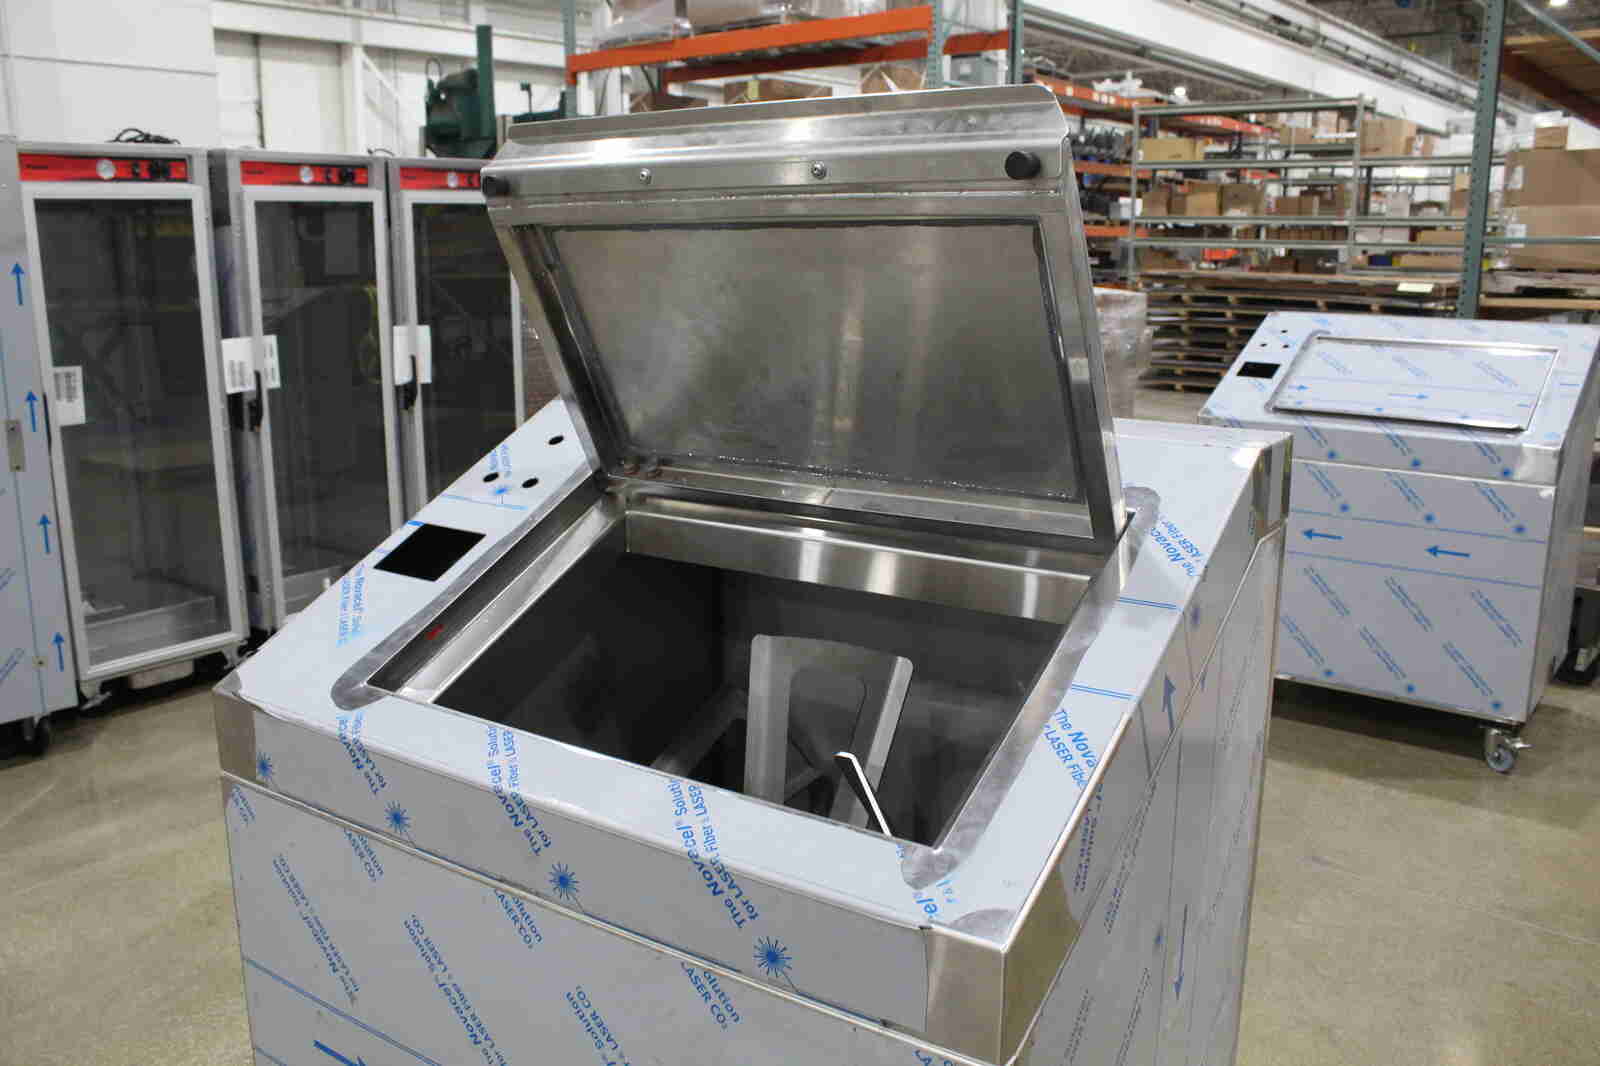 Close up front view of an open stainless steel food service biodigester